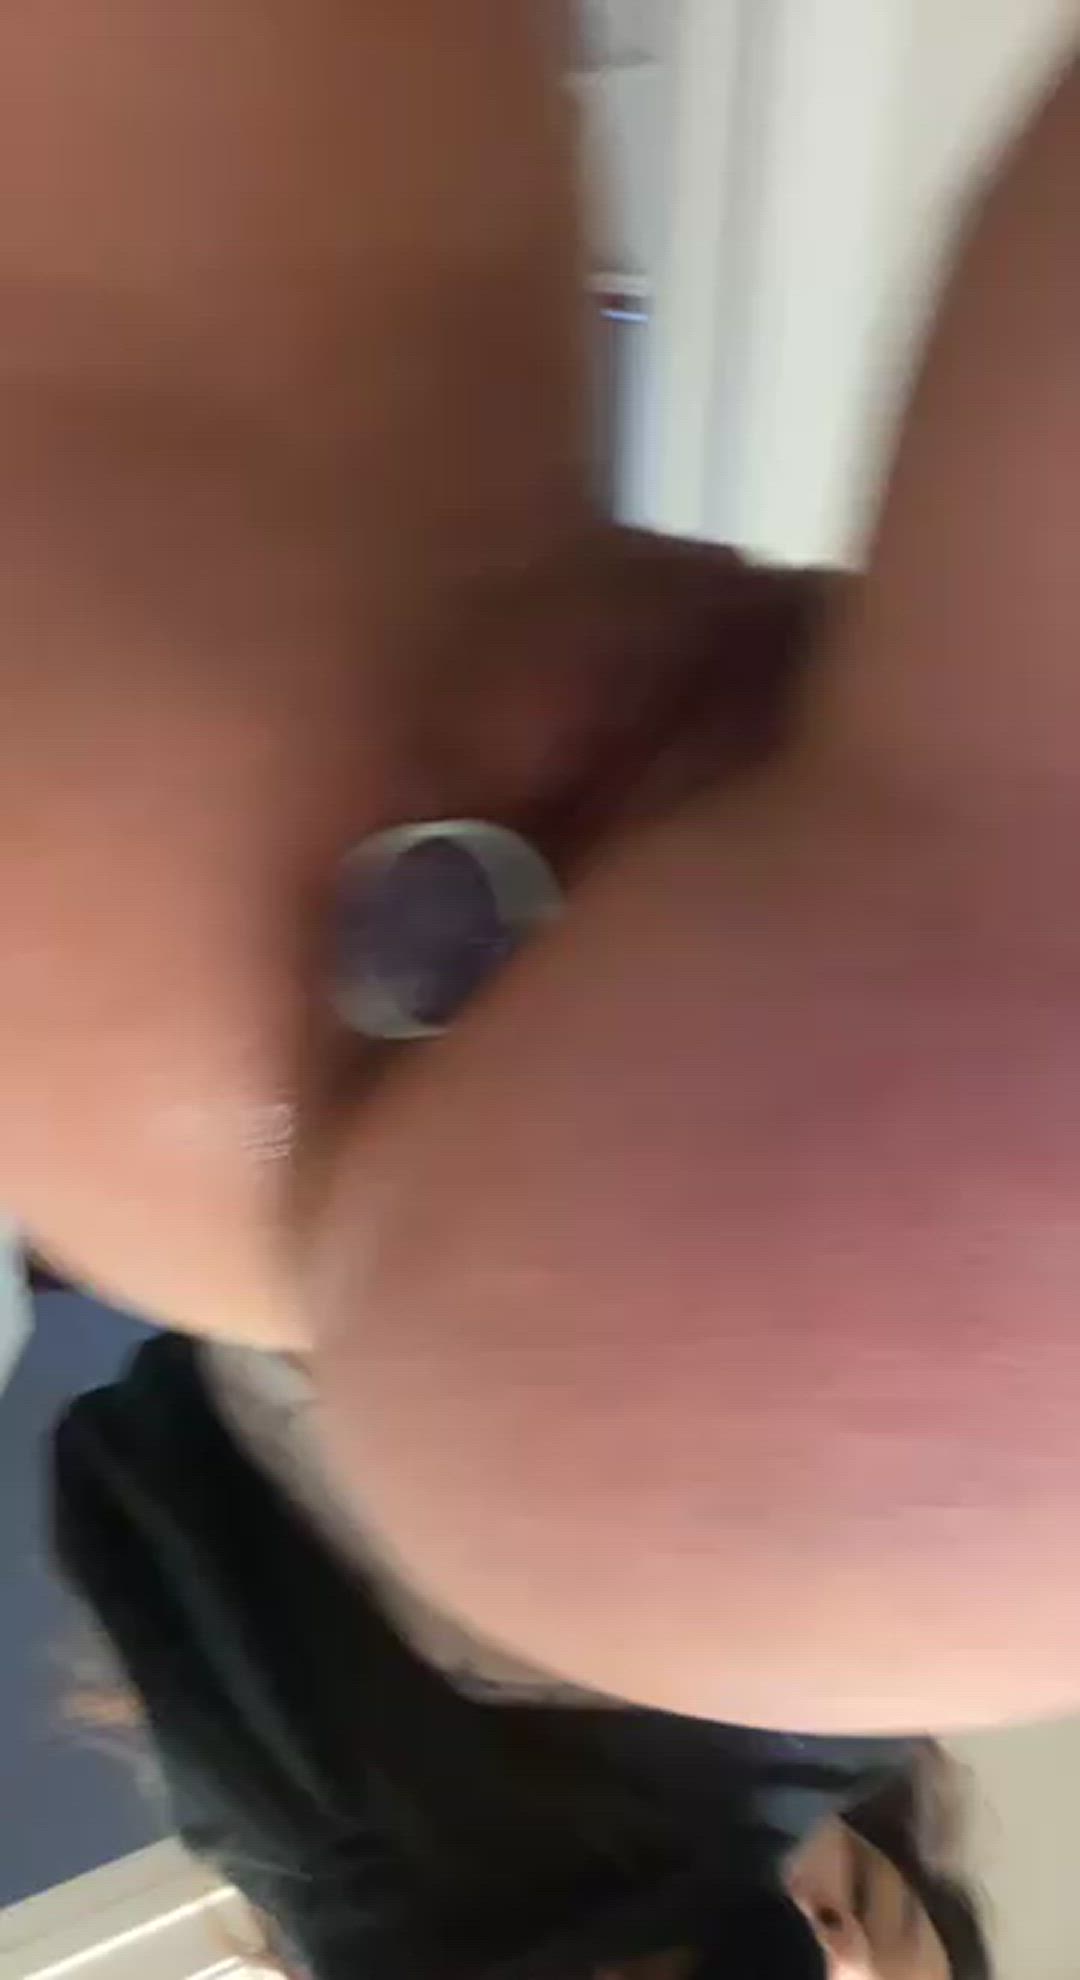 Ass porn video with onlyfans model ar1elsunsh1nee <strong>@ar1el</strong>